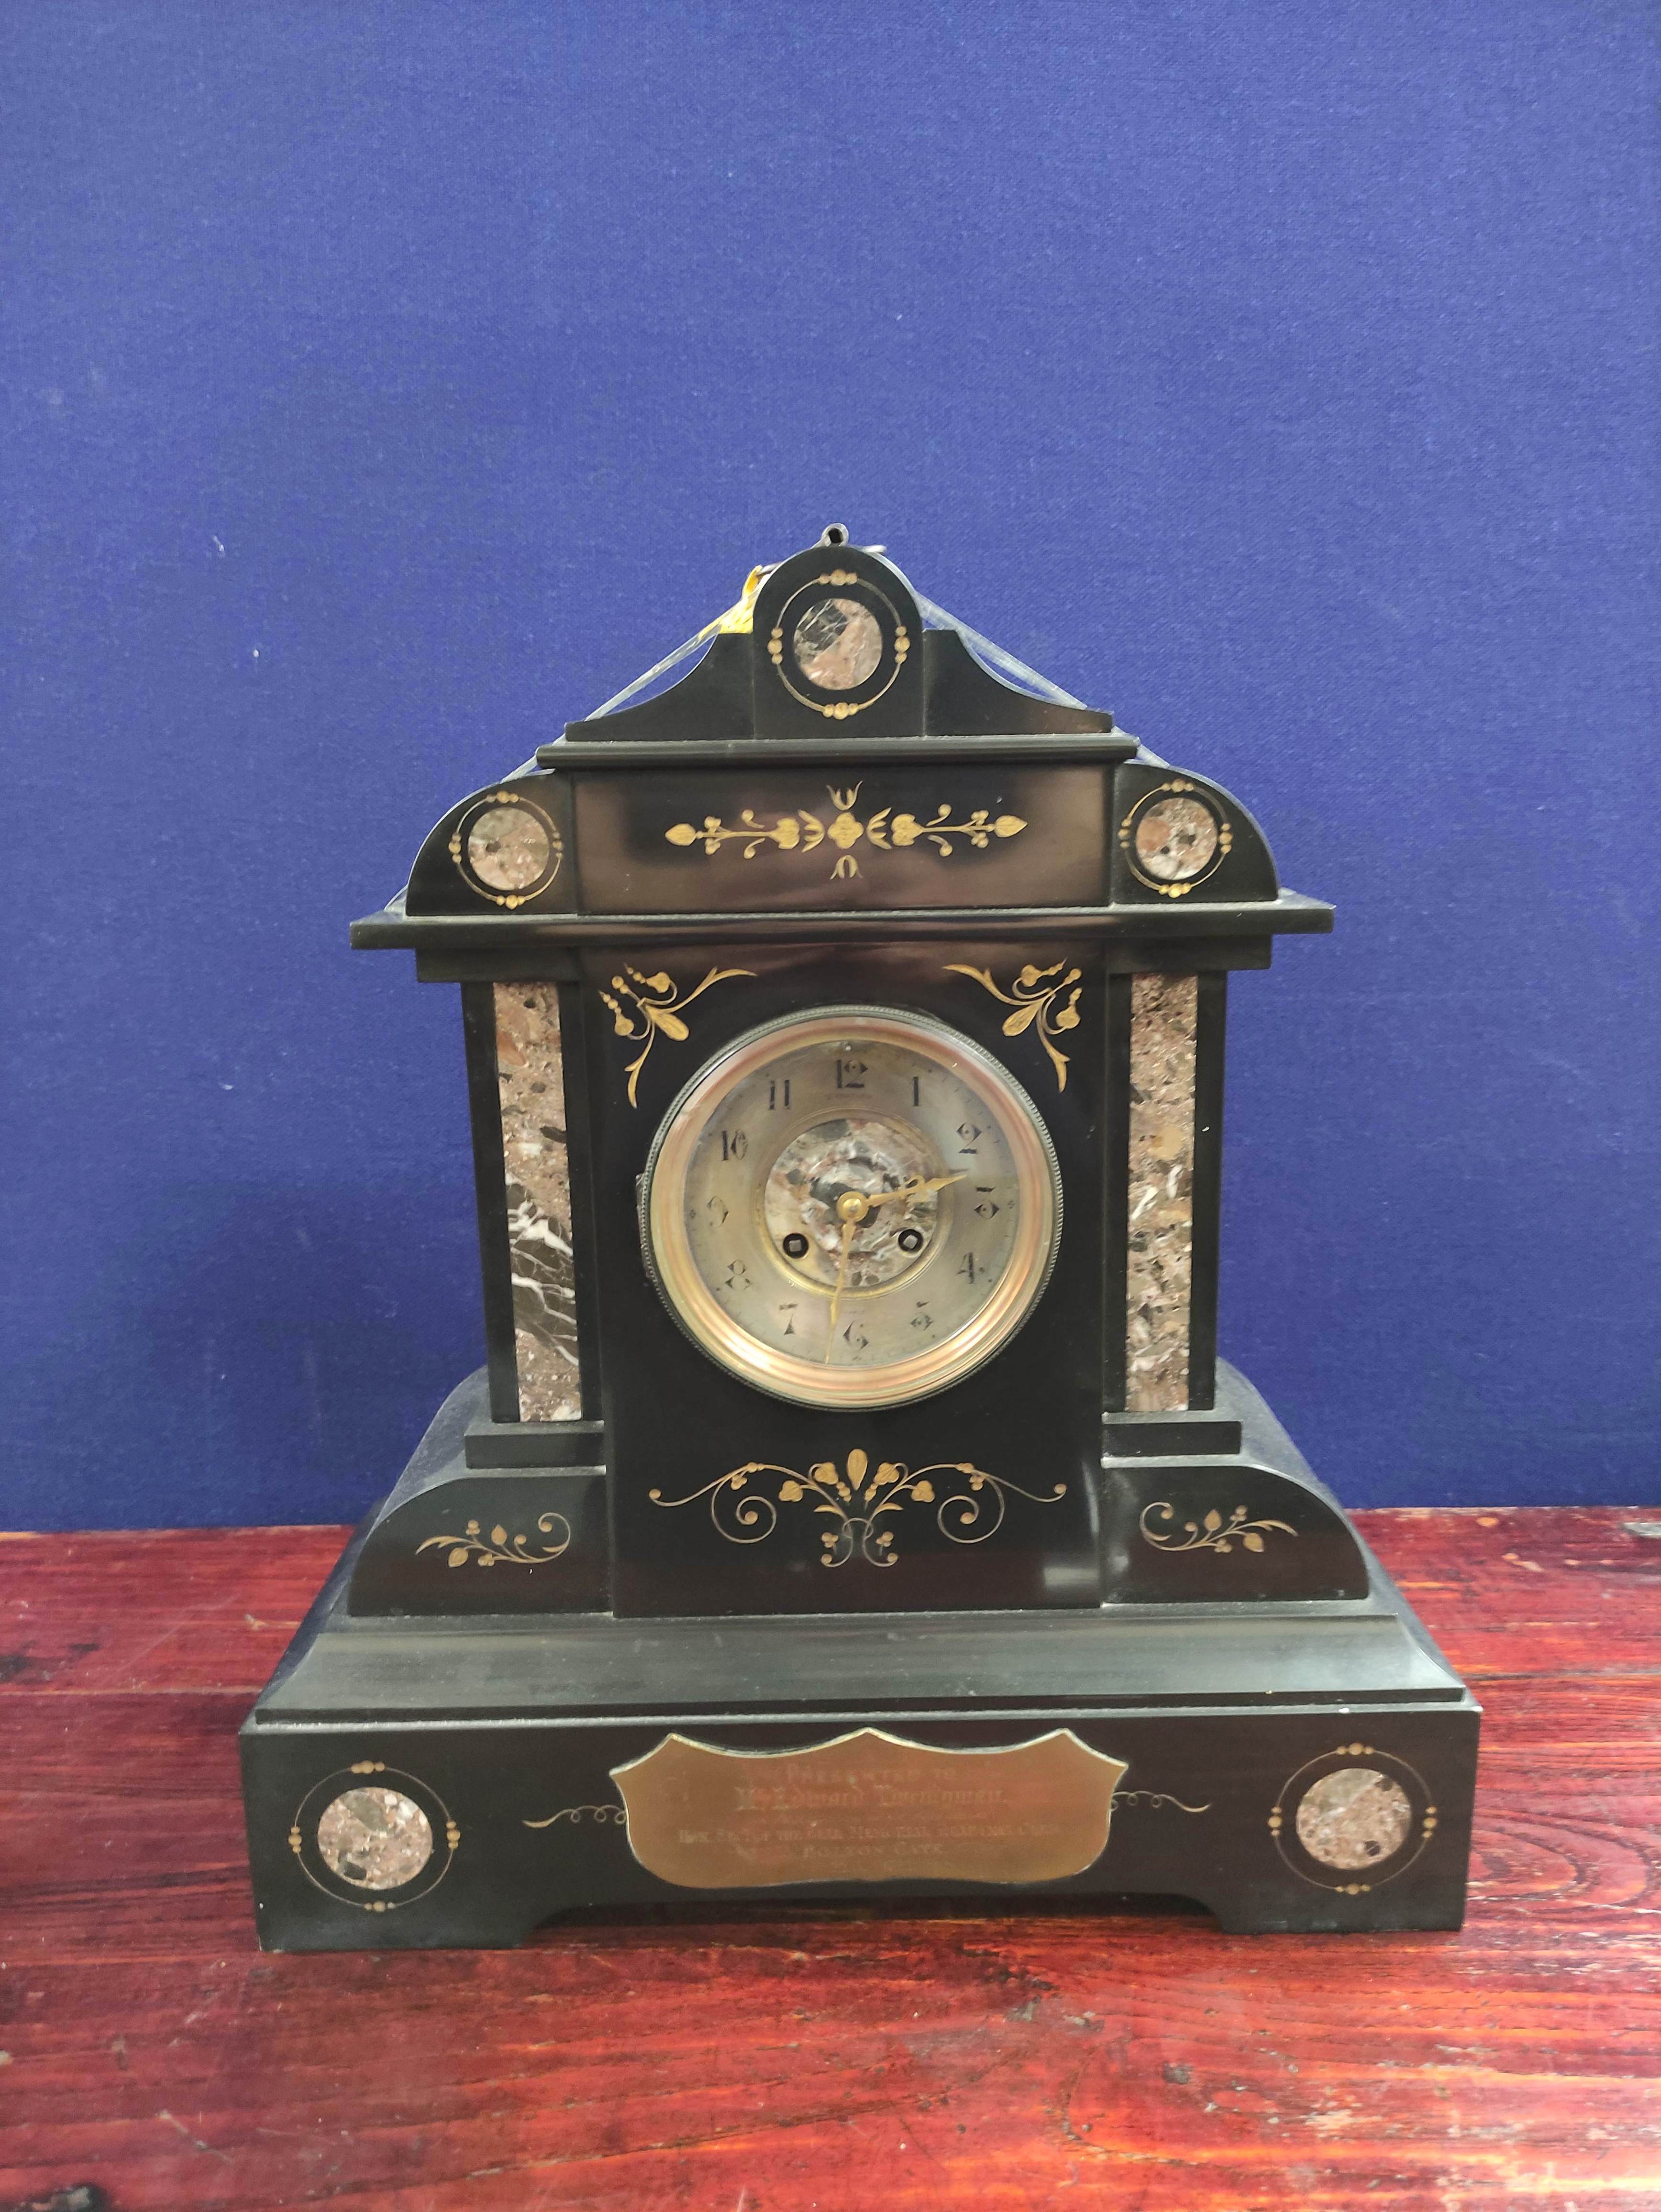 French 19th century mantel clock with inlaid panels and inscribed plaque dated 1892, 44.5cm.